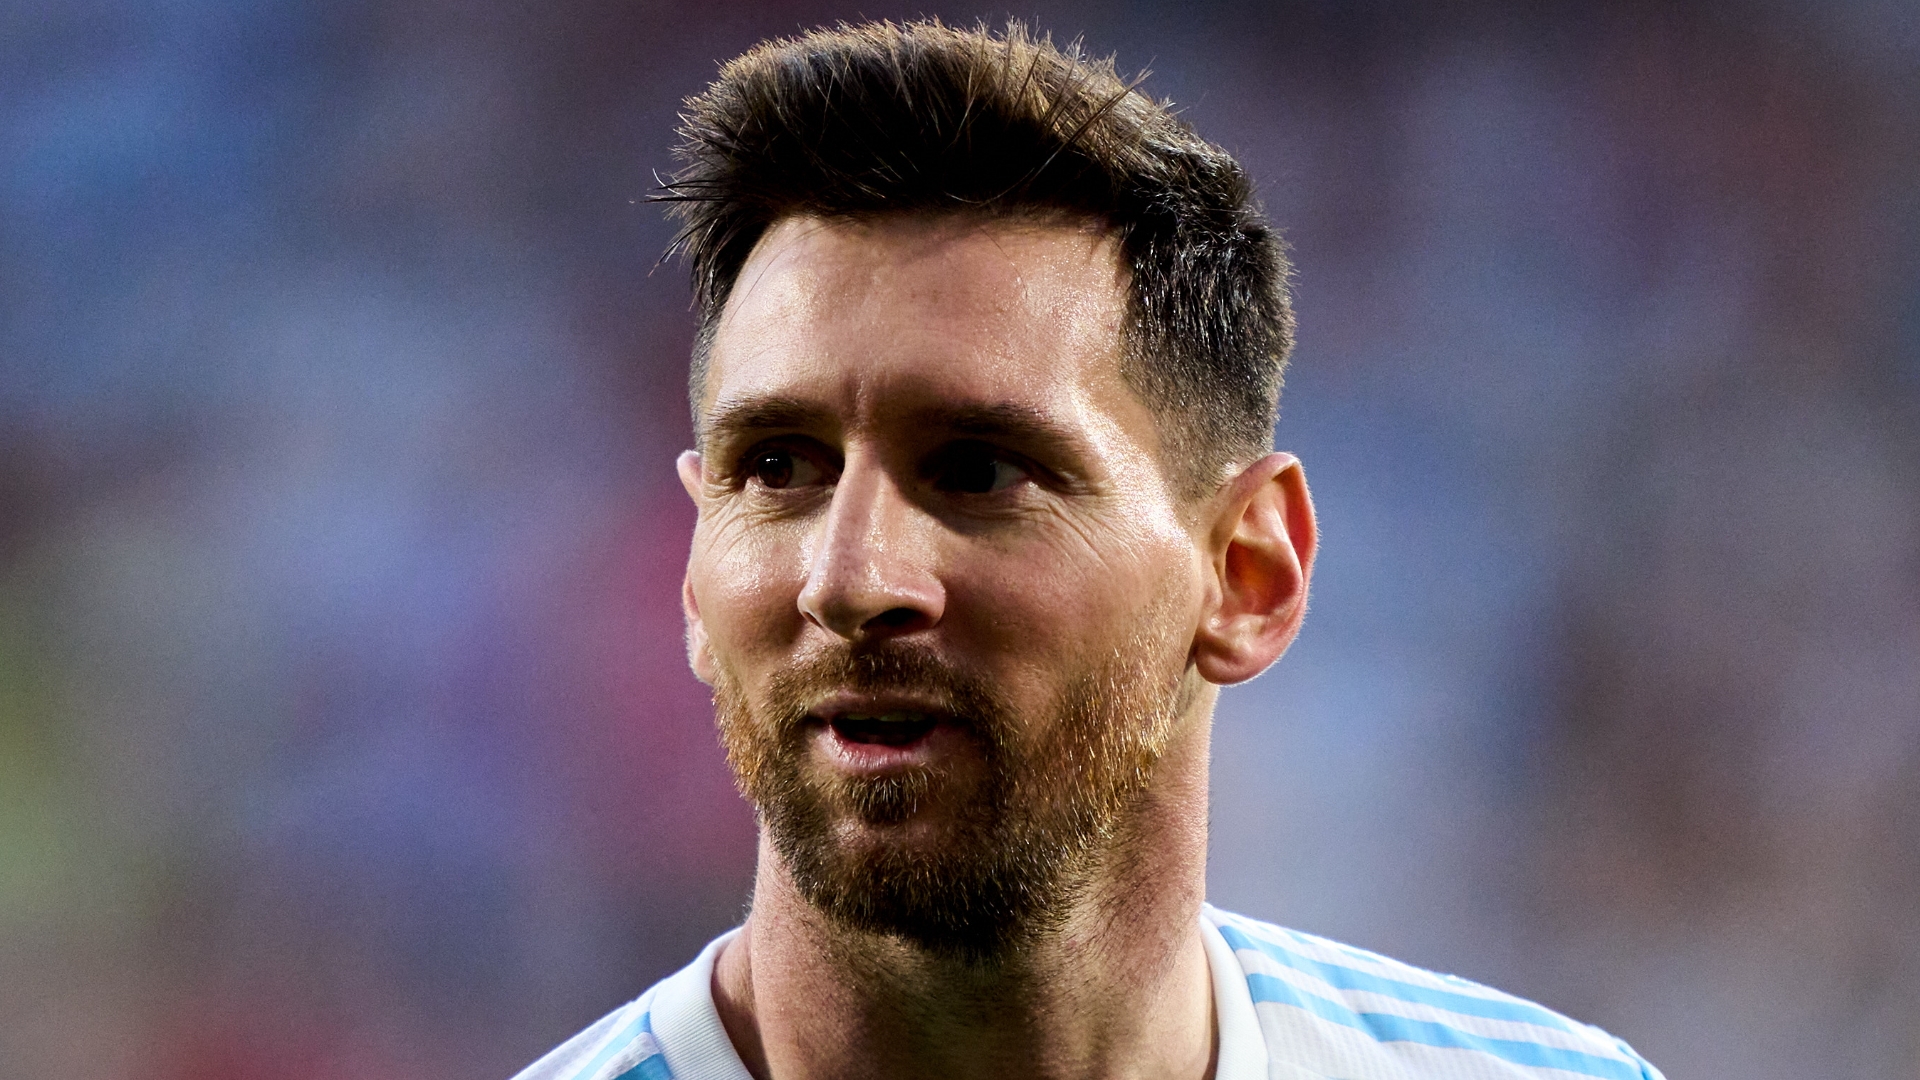 Messi to show off acting chops as PSG star set to appear in comedy drama 'Los Protectores'. Goal.com US